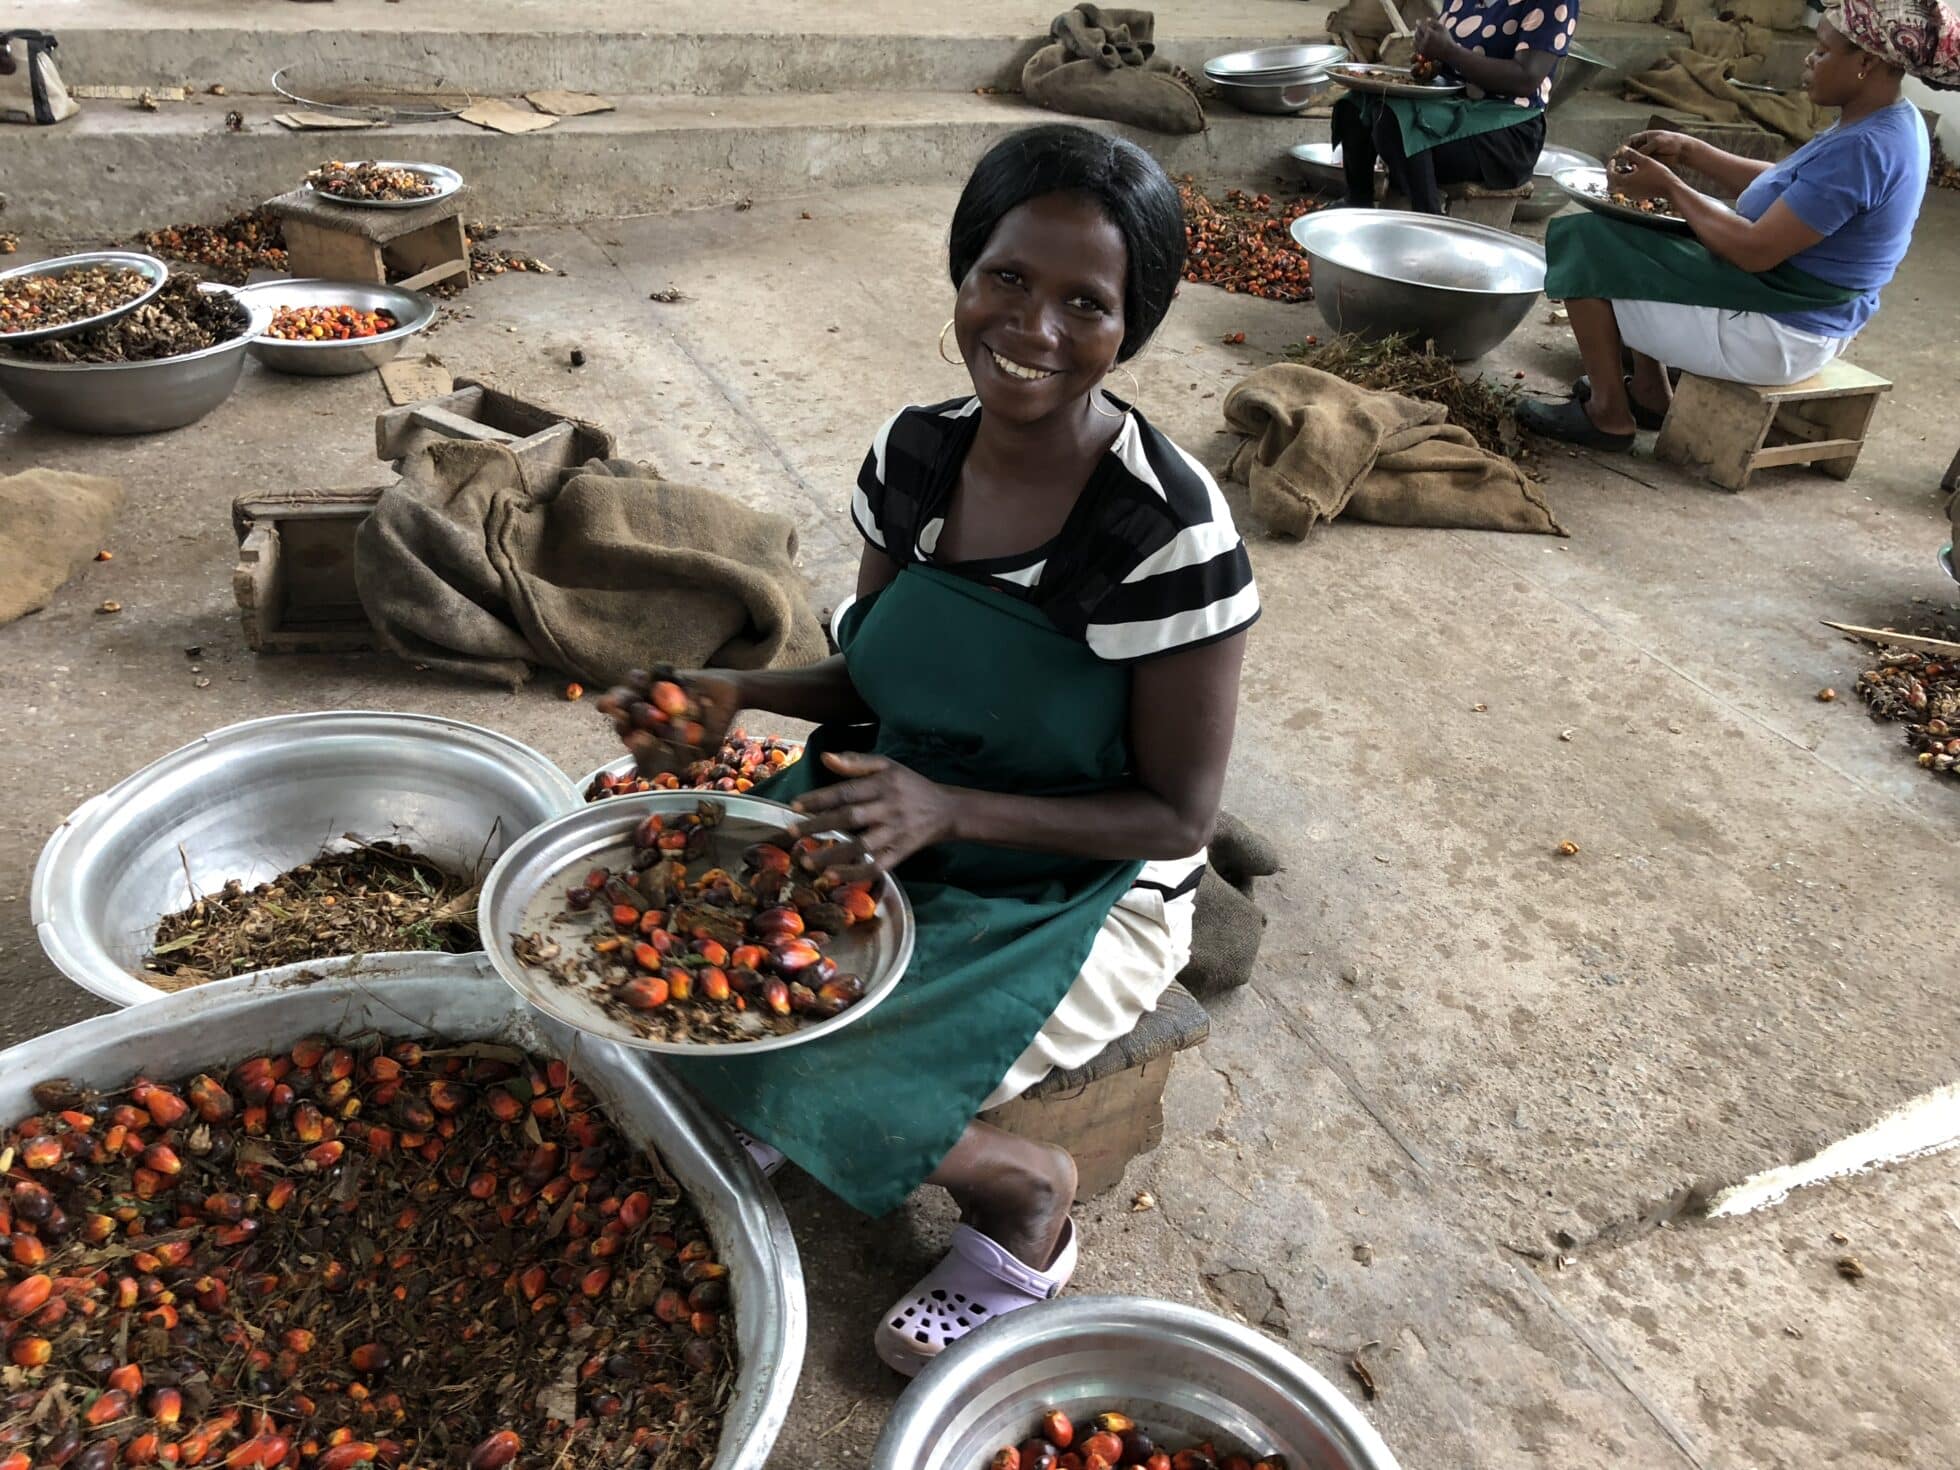 Evaluating How Root Capital’s Client Businesses Impact Smallholder Livelihoods: Oil Palm in Ghana